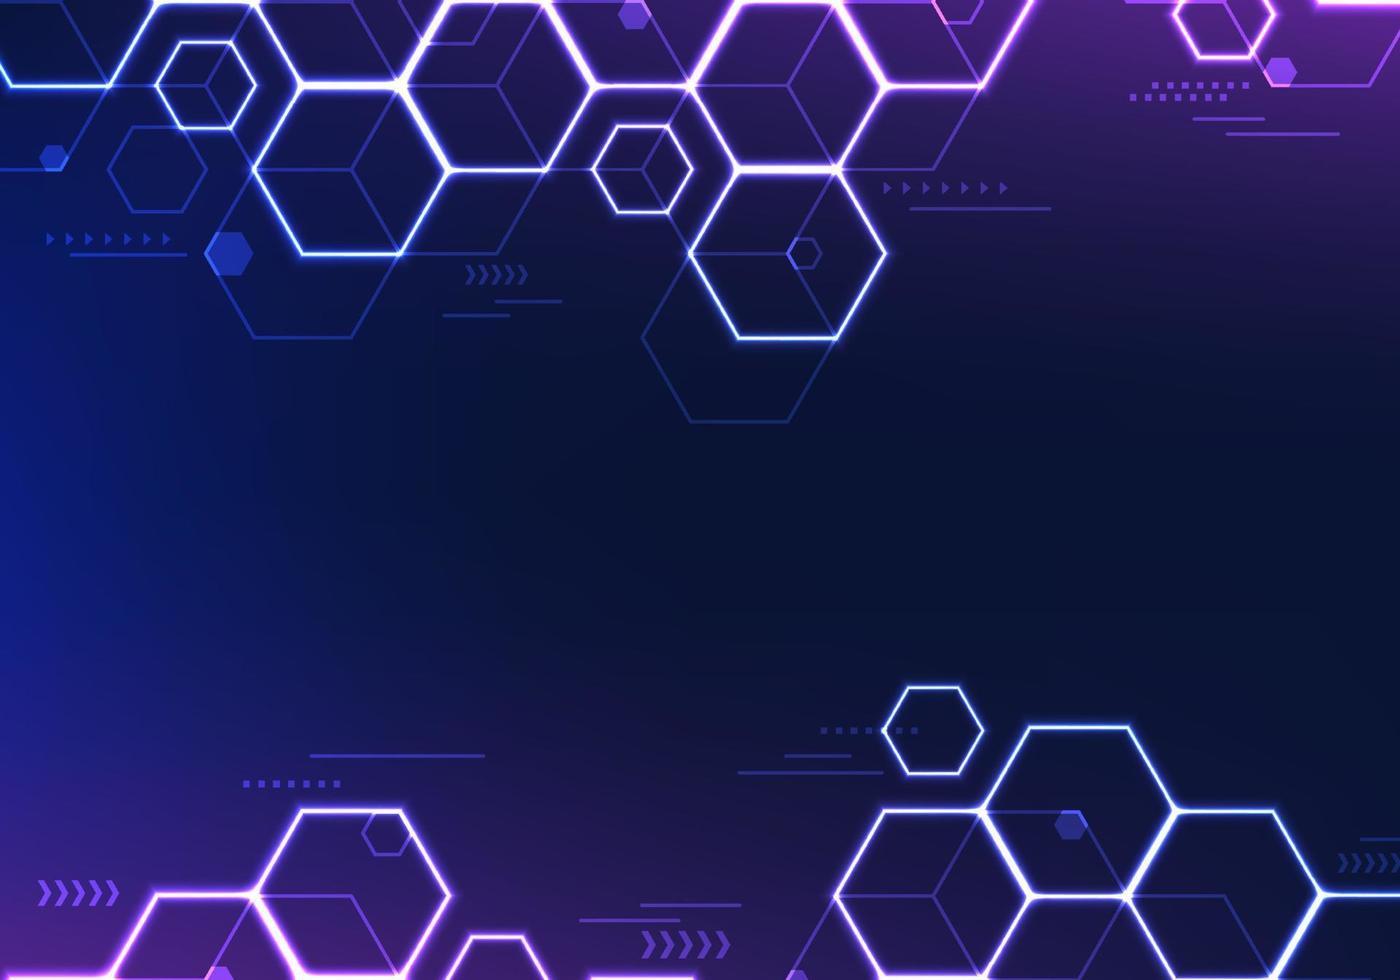 Abstract innovation technology background blue and purple neon lighting hexagon geometric pattern vector